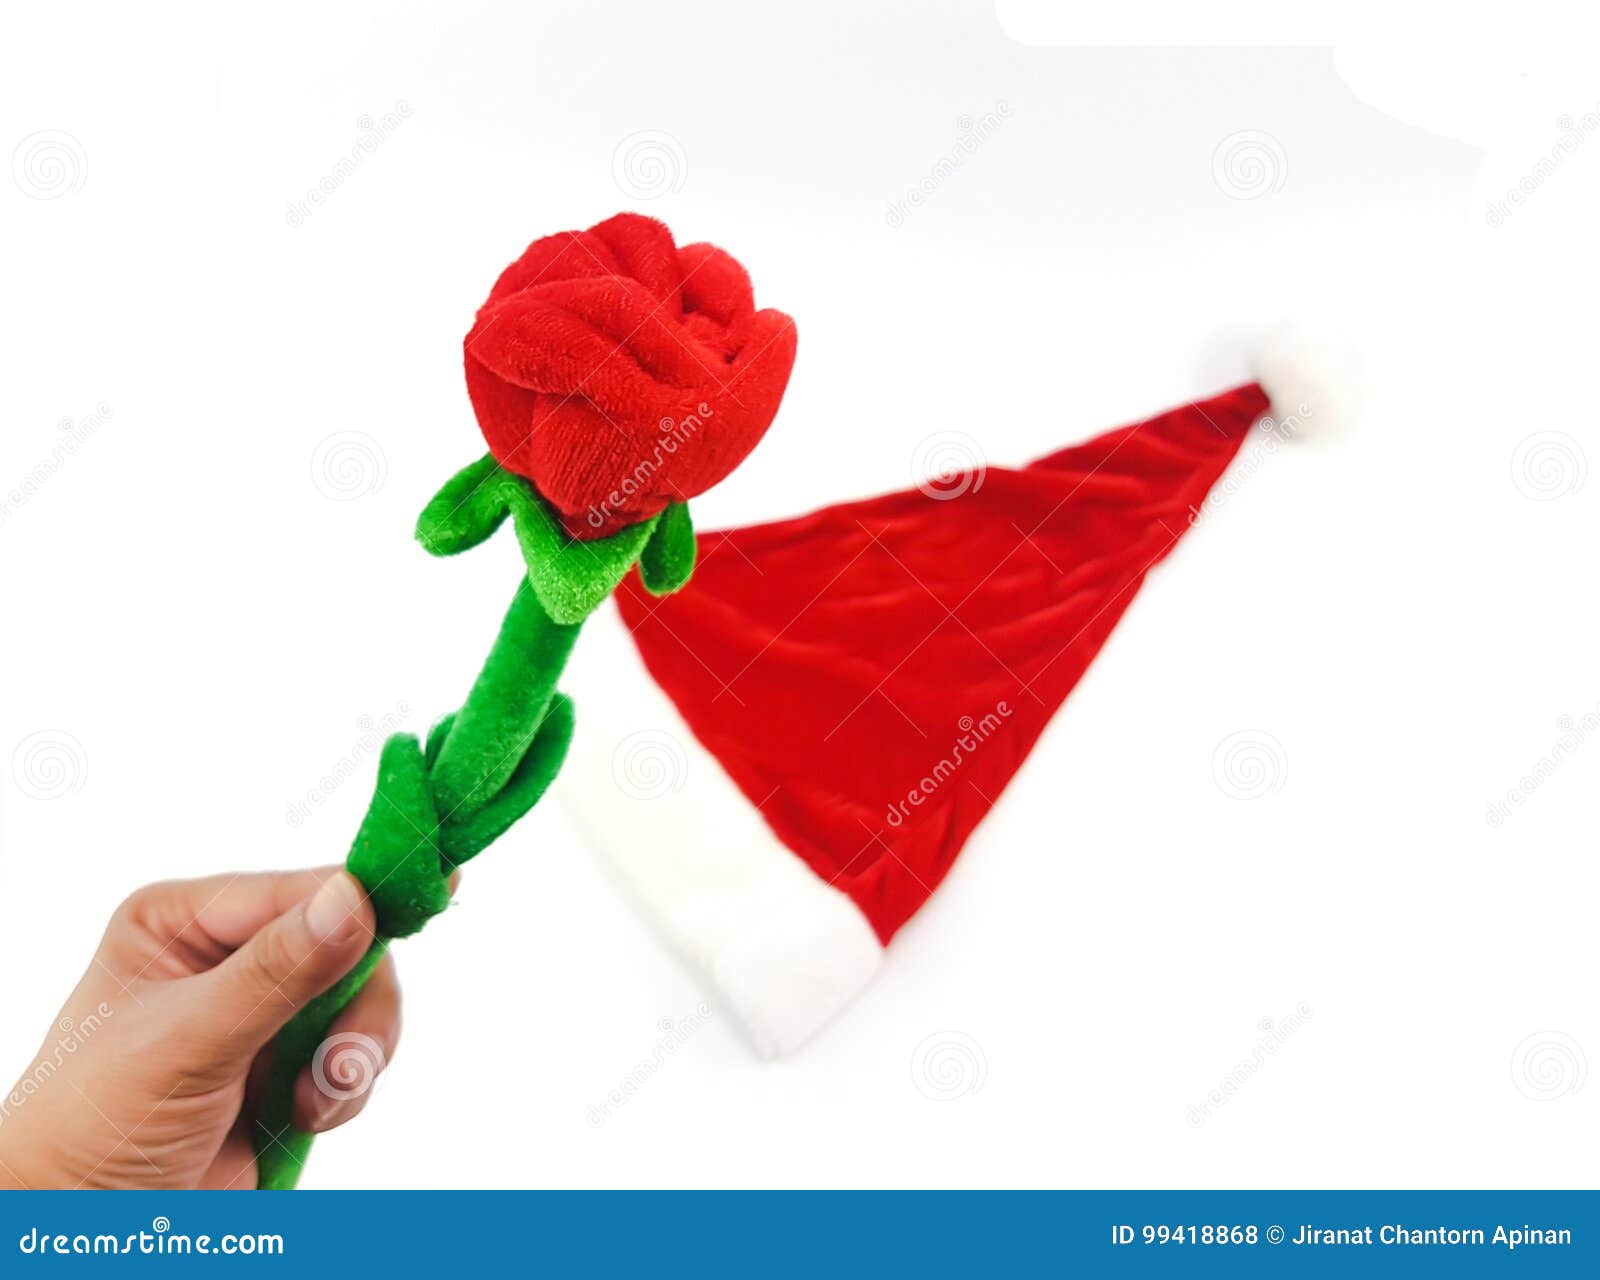 man hand holding the phony red rose with green stalk above santa